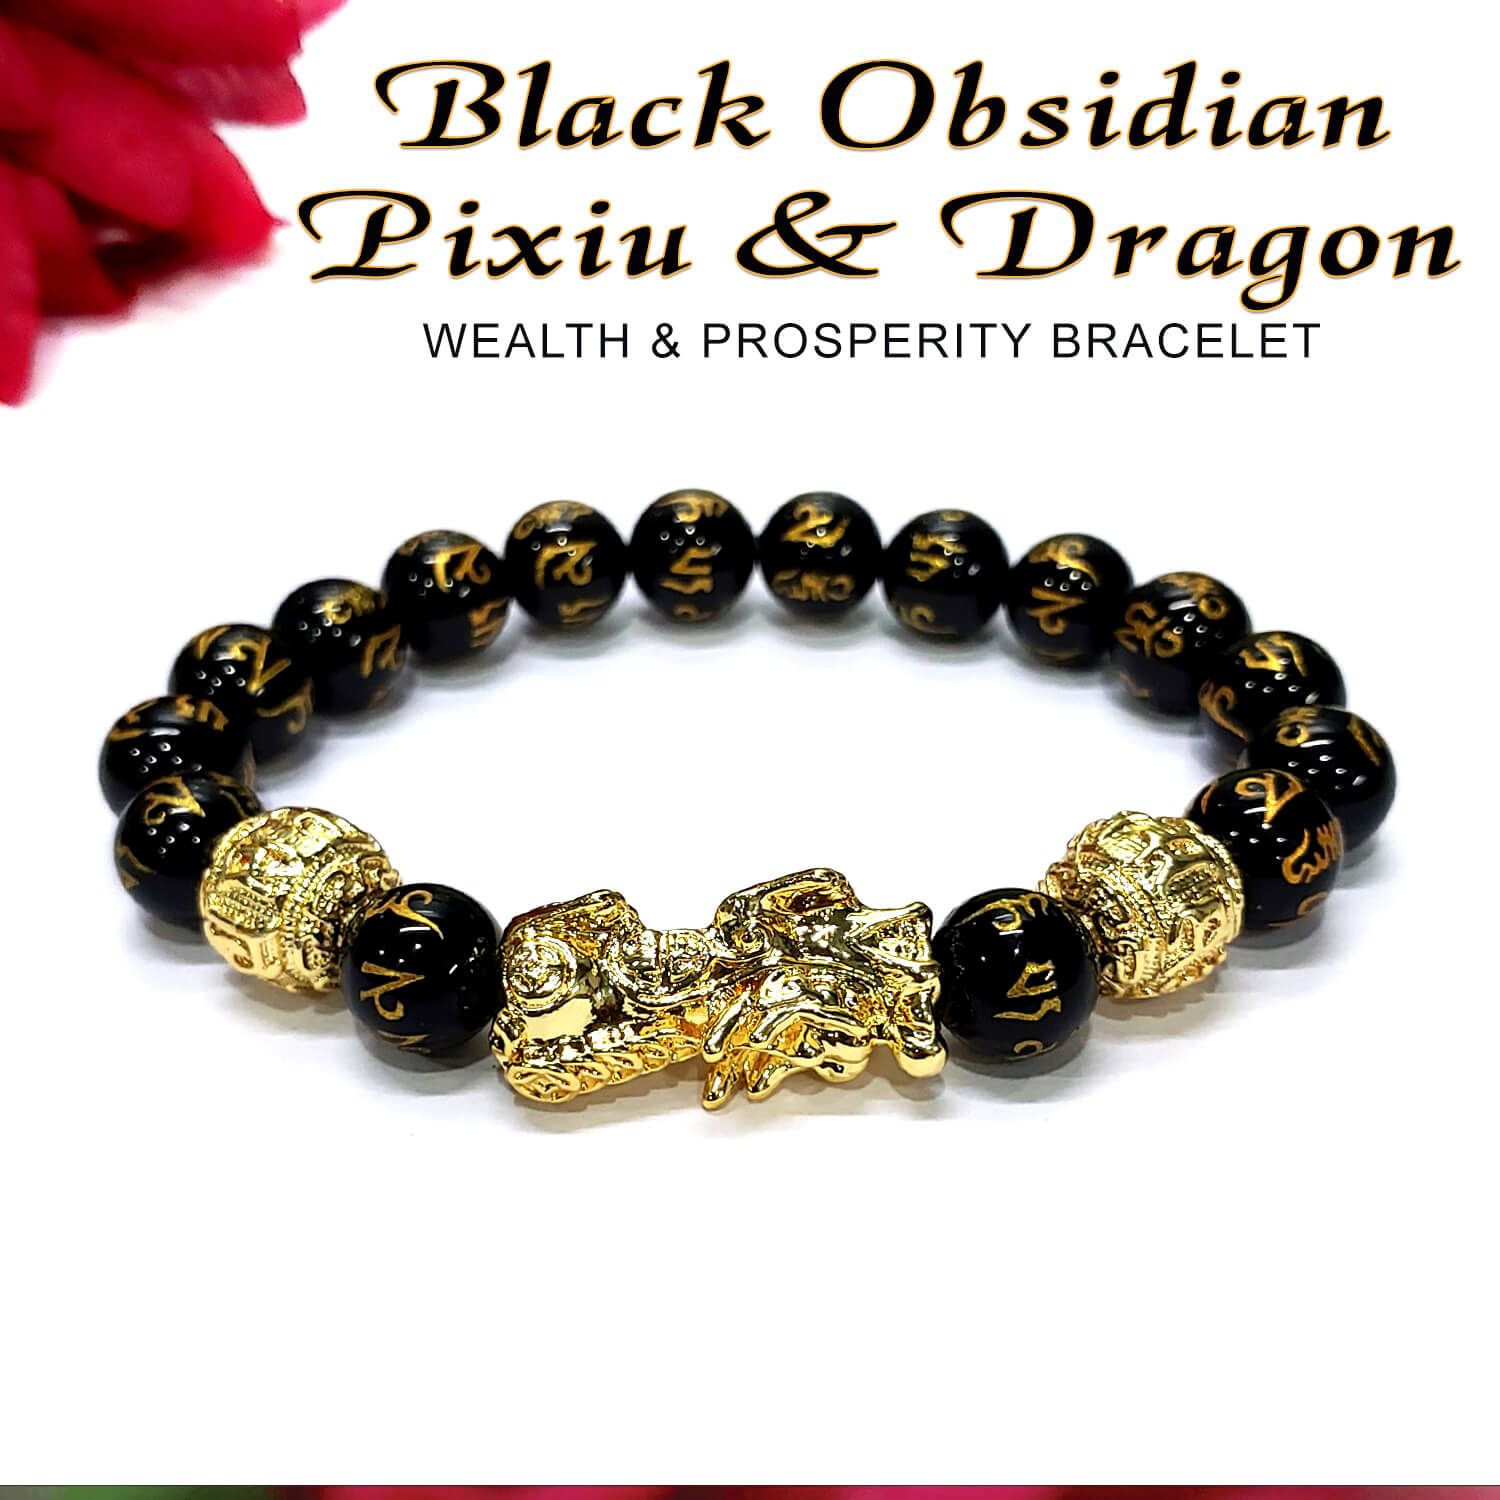 Black Obsidian Bracelet with Copper Ball Spacers - Spirit Connexions